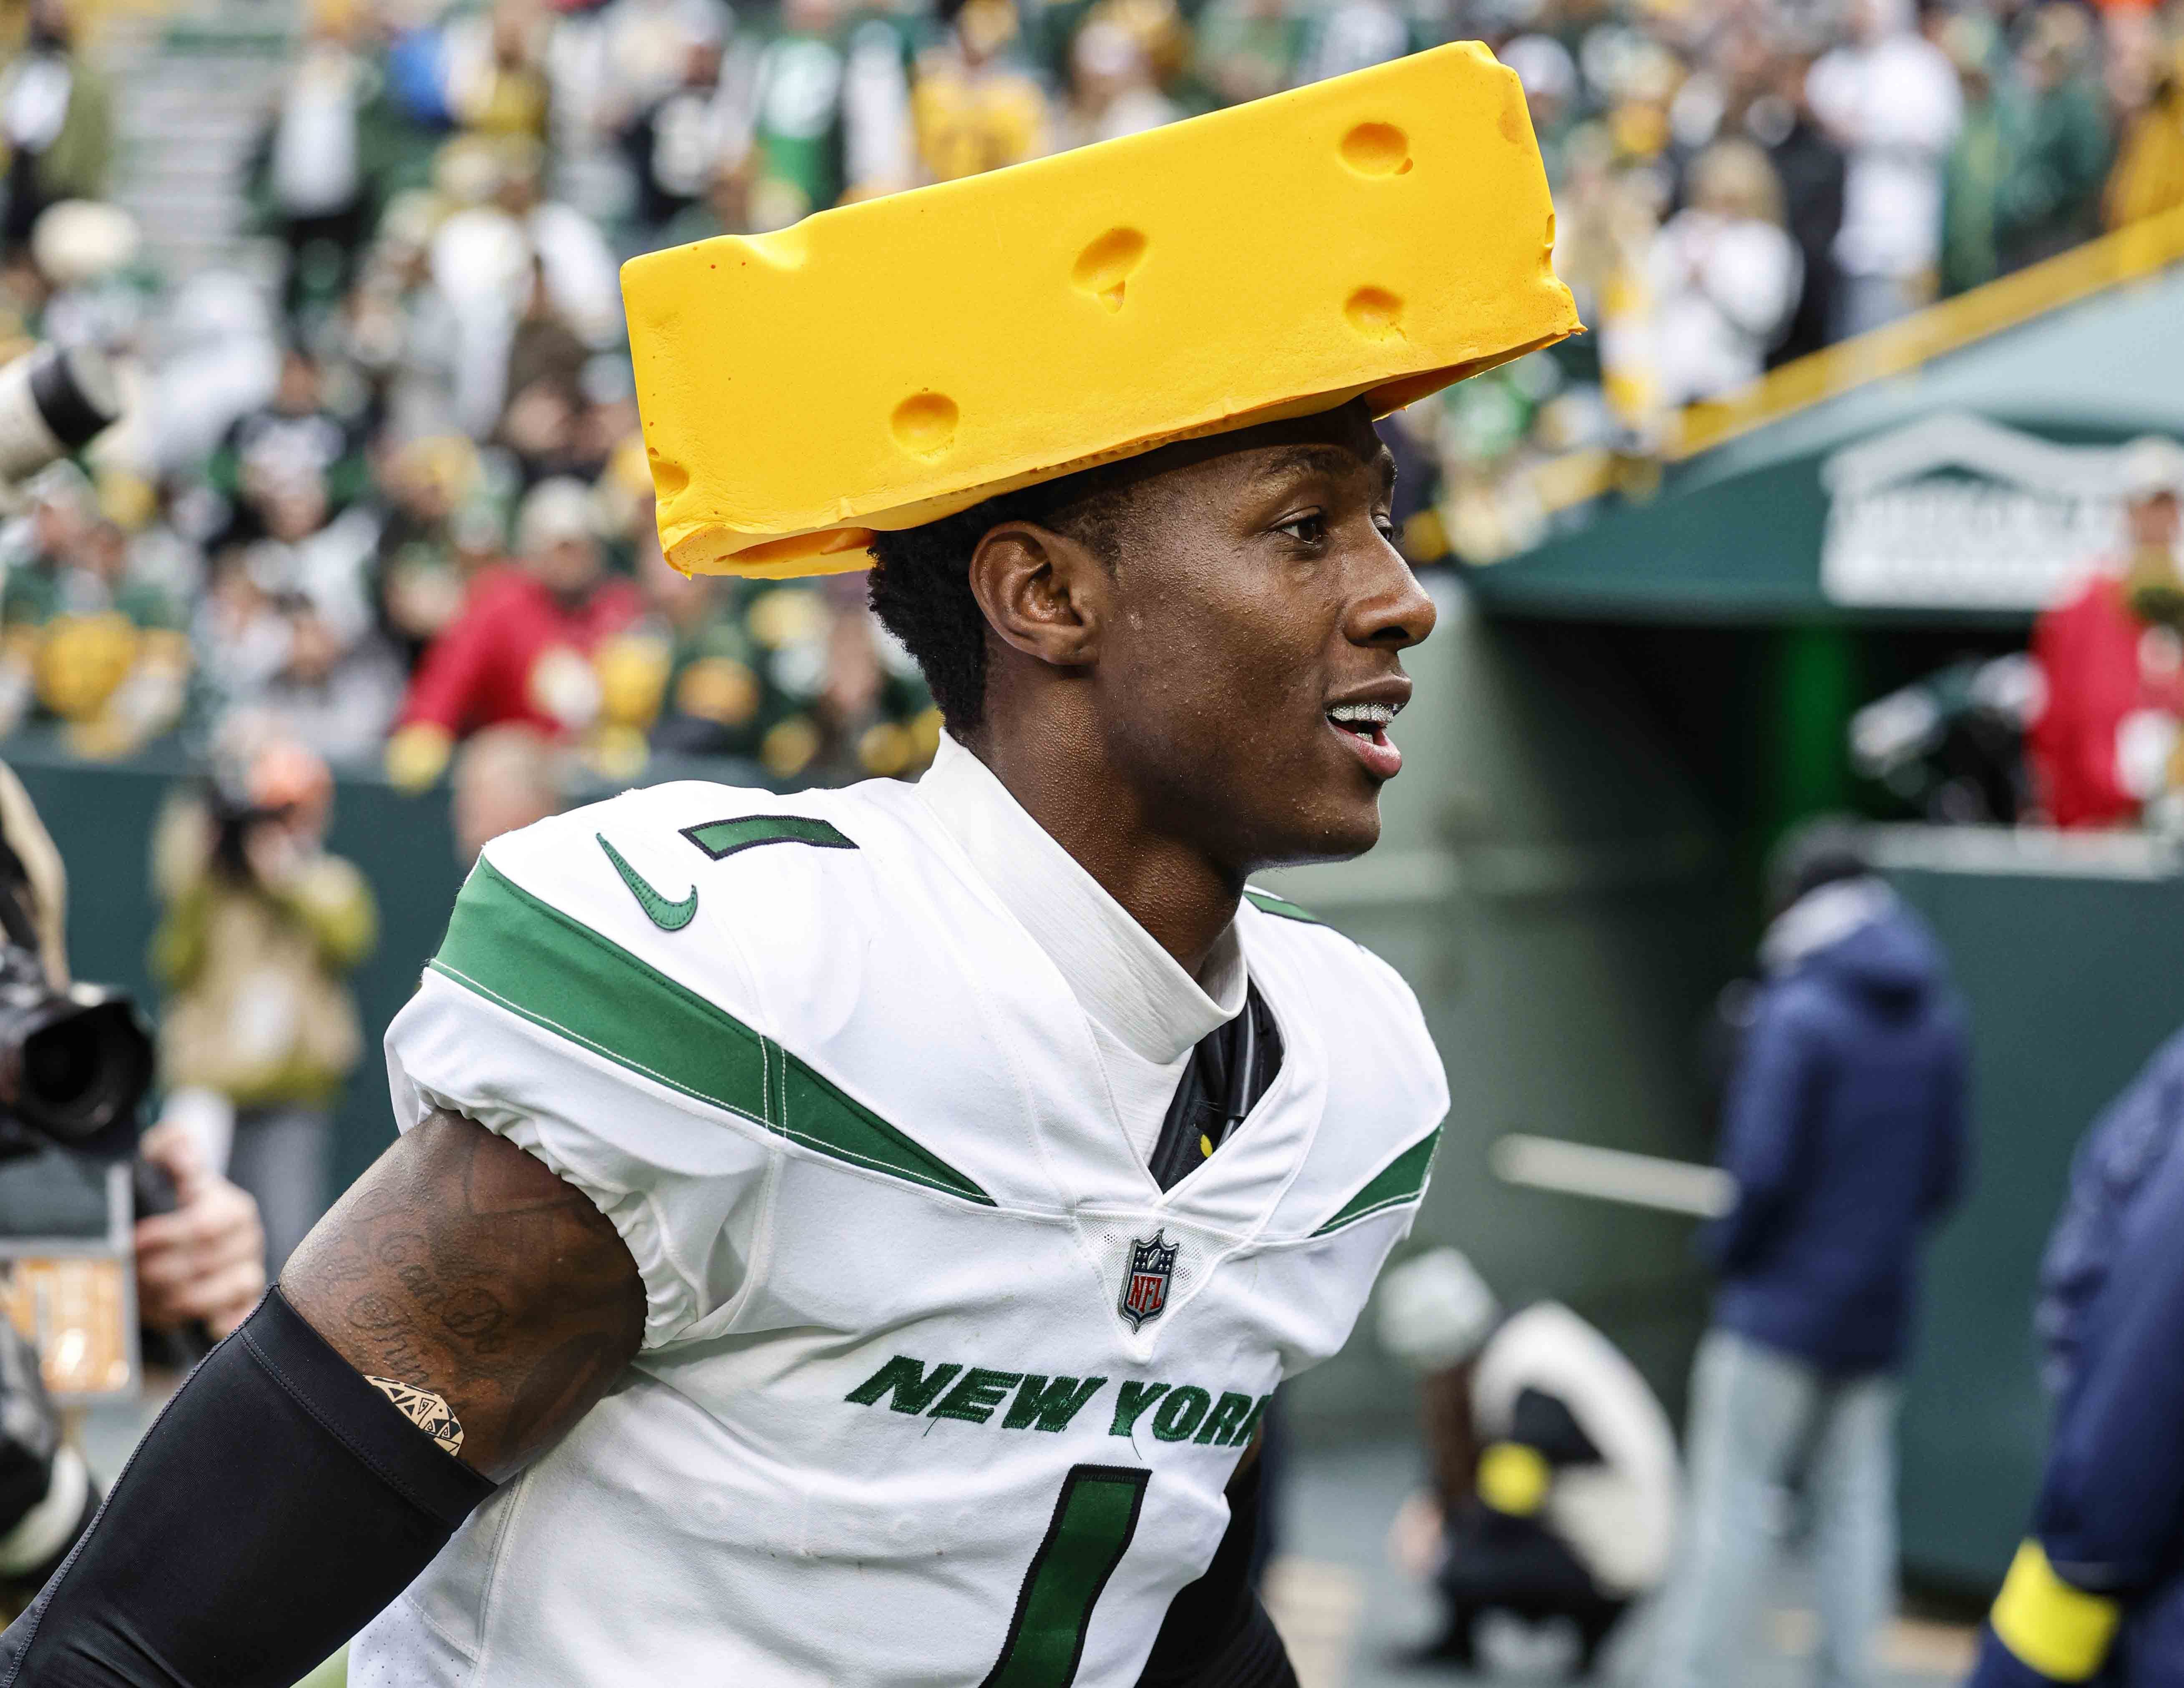 Say cheese: Jets' Sauce Gardner gets special piece of headgear after  beating Packers